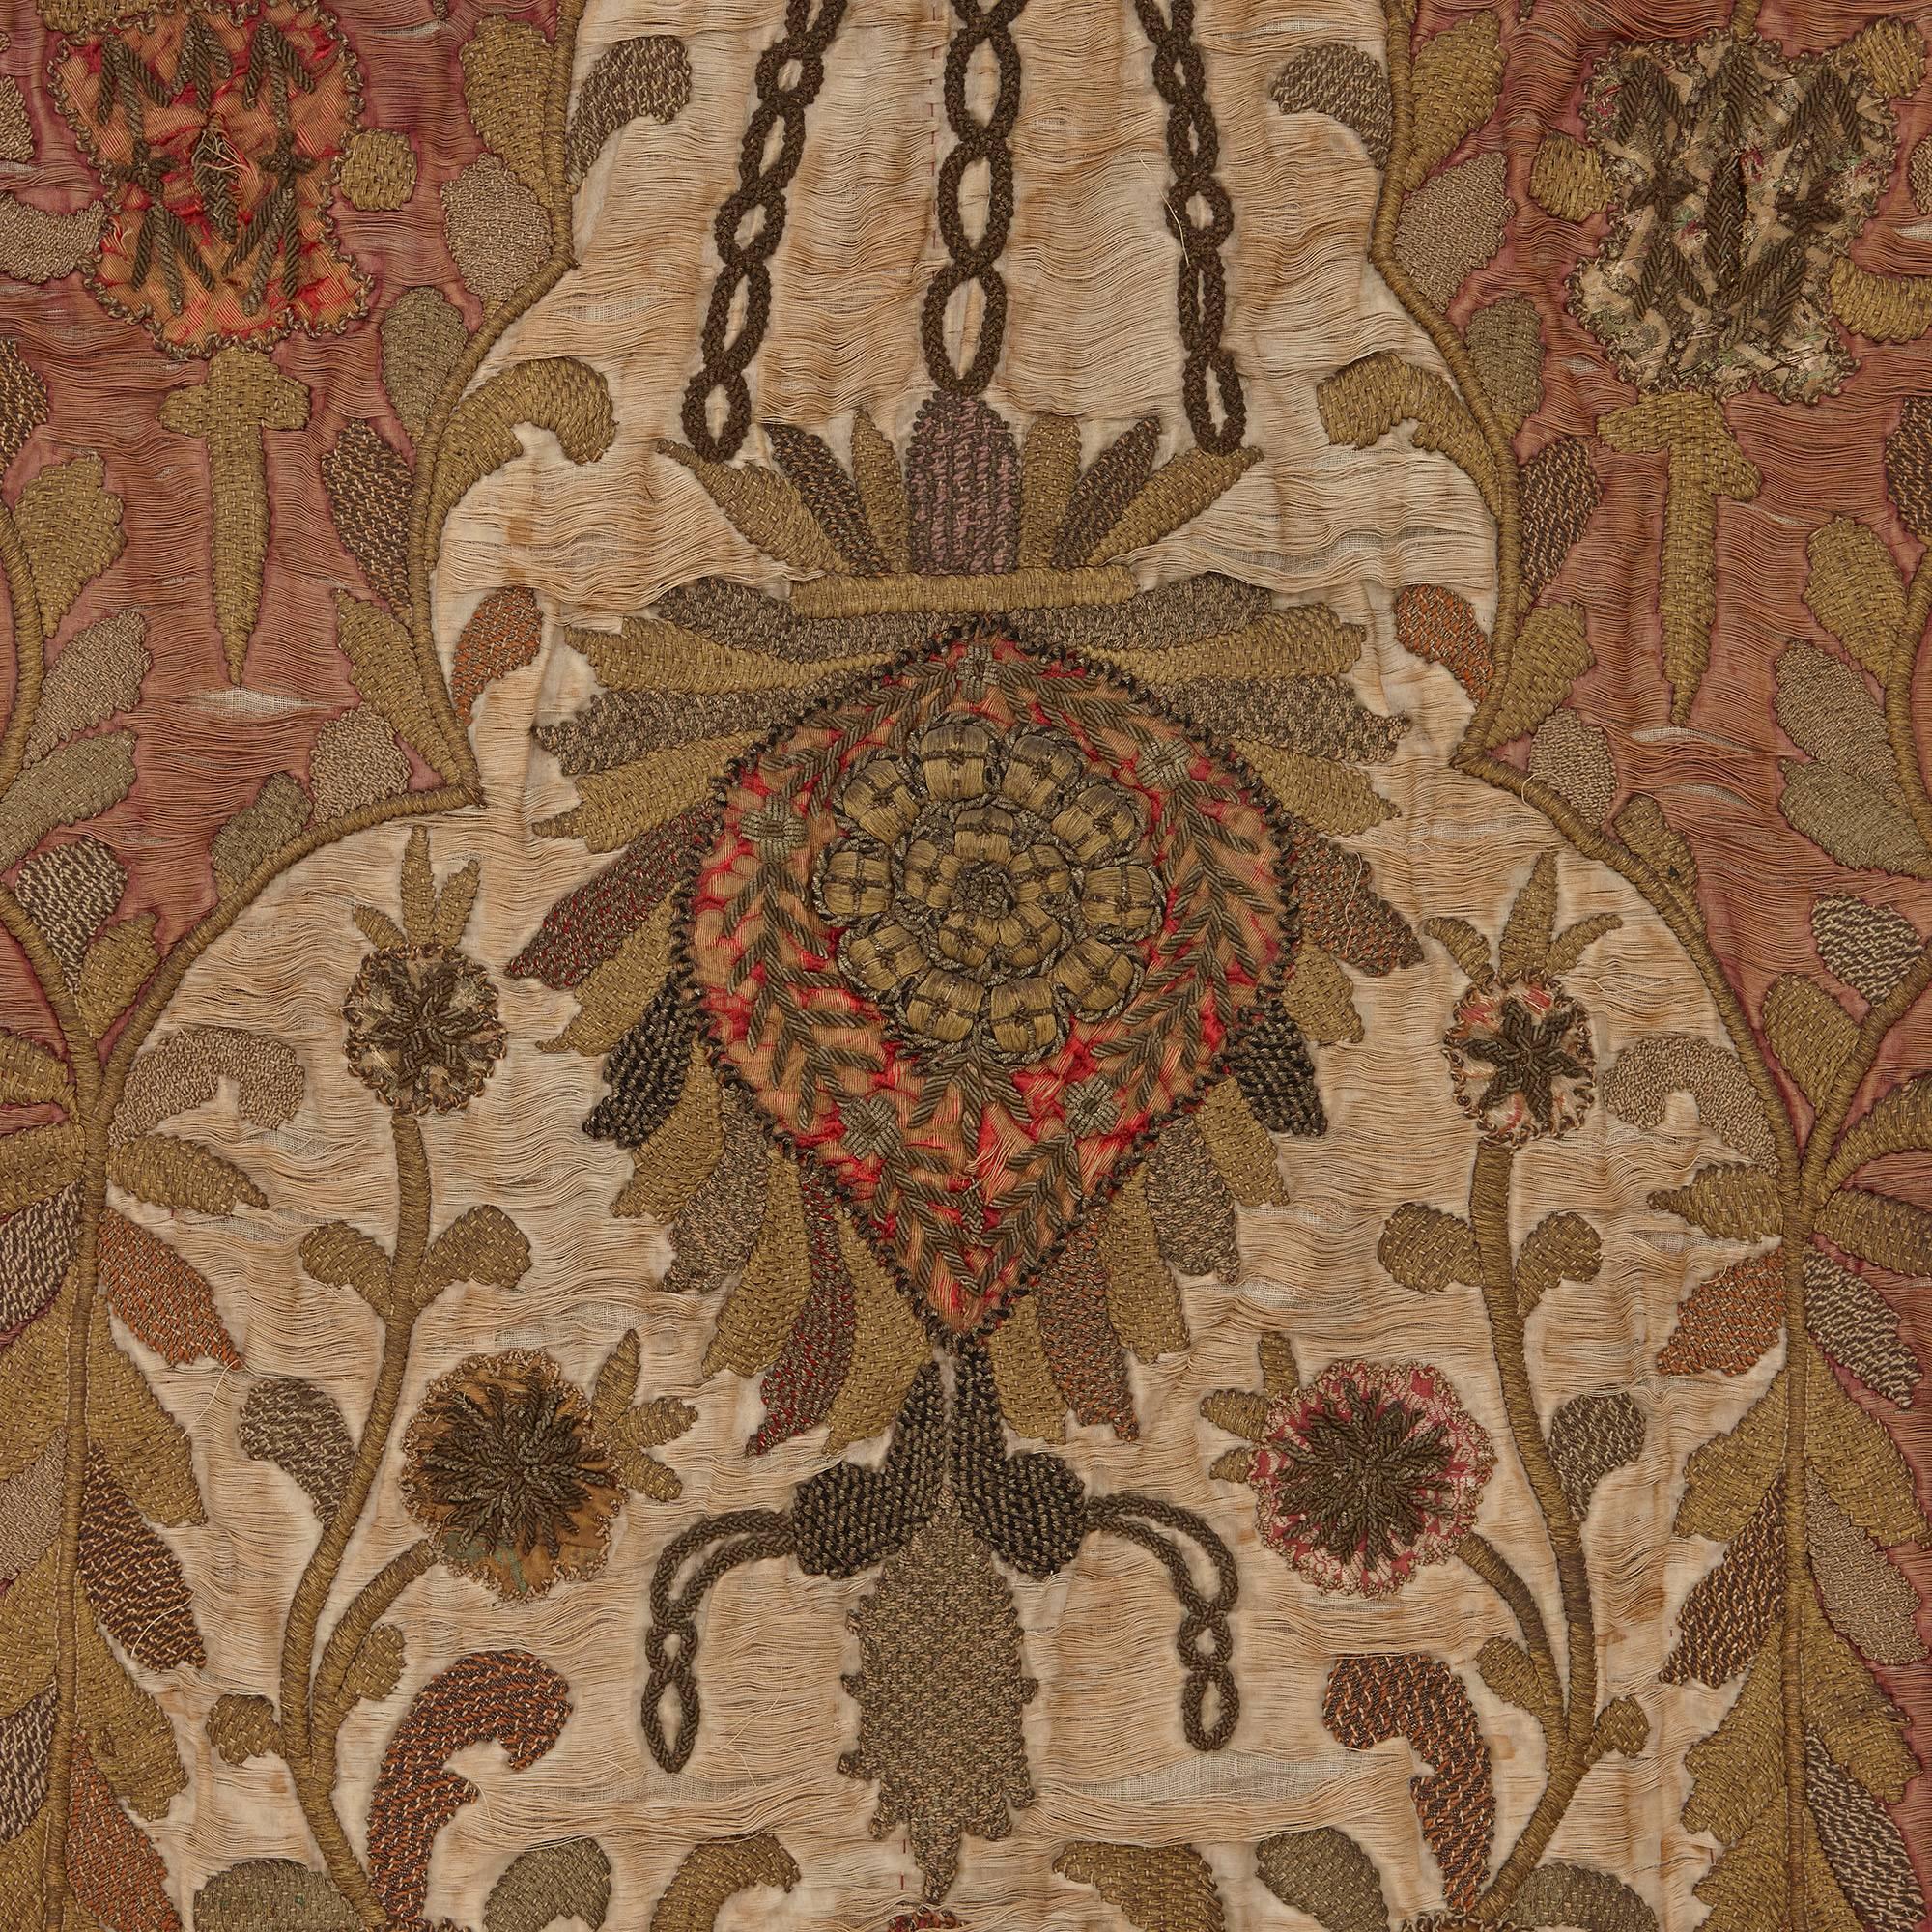 Featuring a central appliqué cream silk satin pointed motif, heavily embroidered in gilt thread floral designs, mounted with a metal rod to one end.

The intricate floral detailing of this unusual prayer rug is testament to the high quality